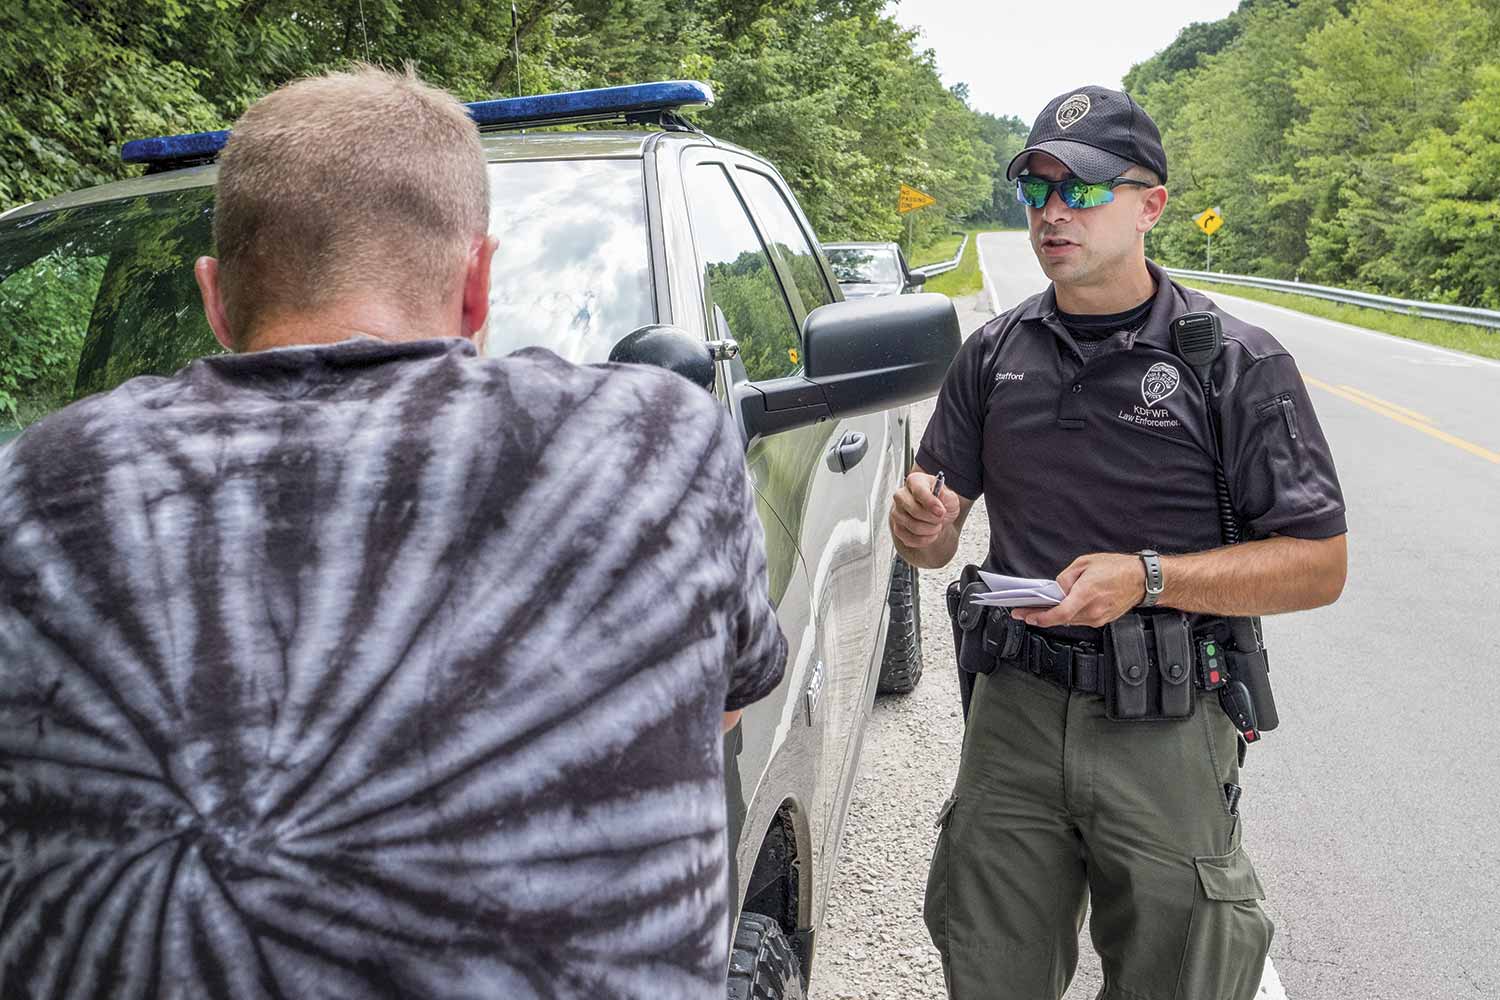  Conservation officer Brad Stafford’s fishing compliance check on Gary Hogston quickly turned into a foot chase and subsequent man hunt for law enforcement officers in Rowan County. Hogston was eventually caught by members of the Morehead Police Depa